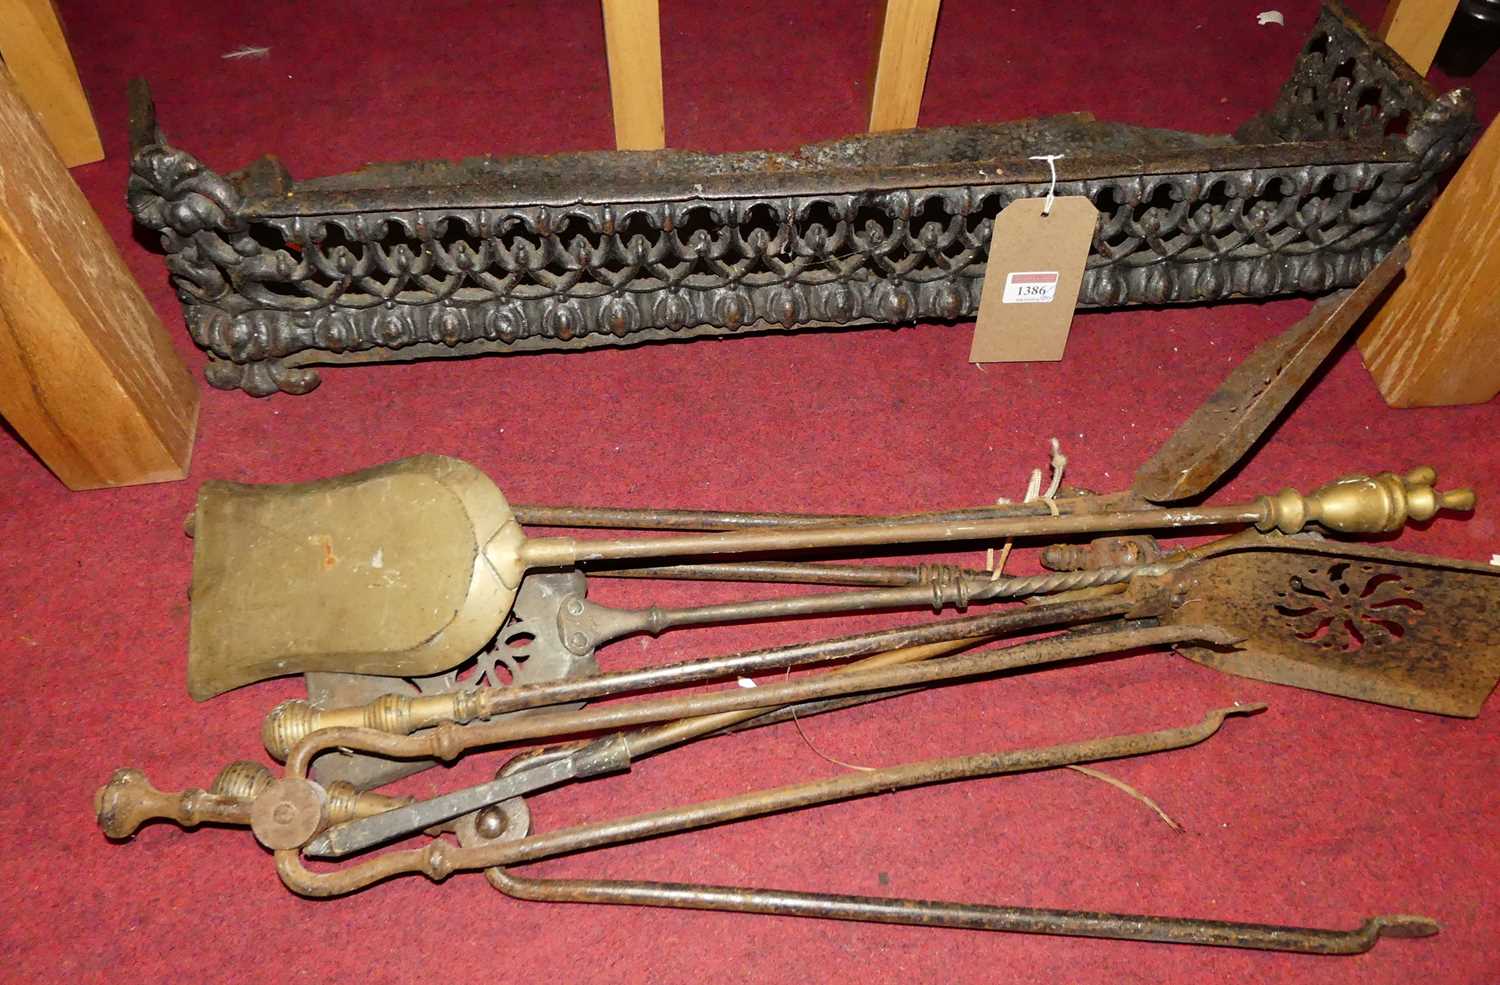 Sundry 19th century fire tools, and a pierced fender